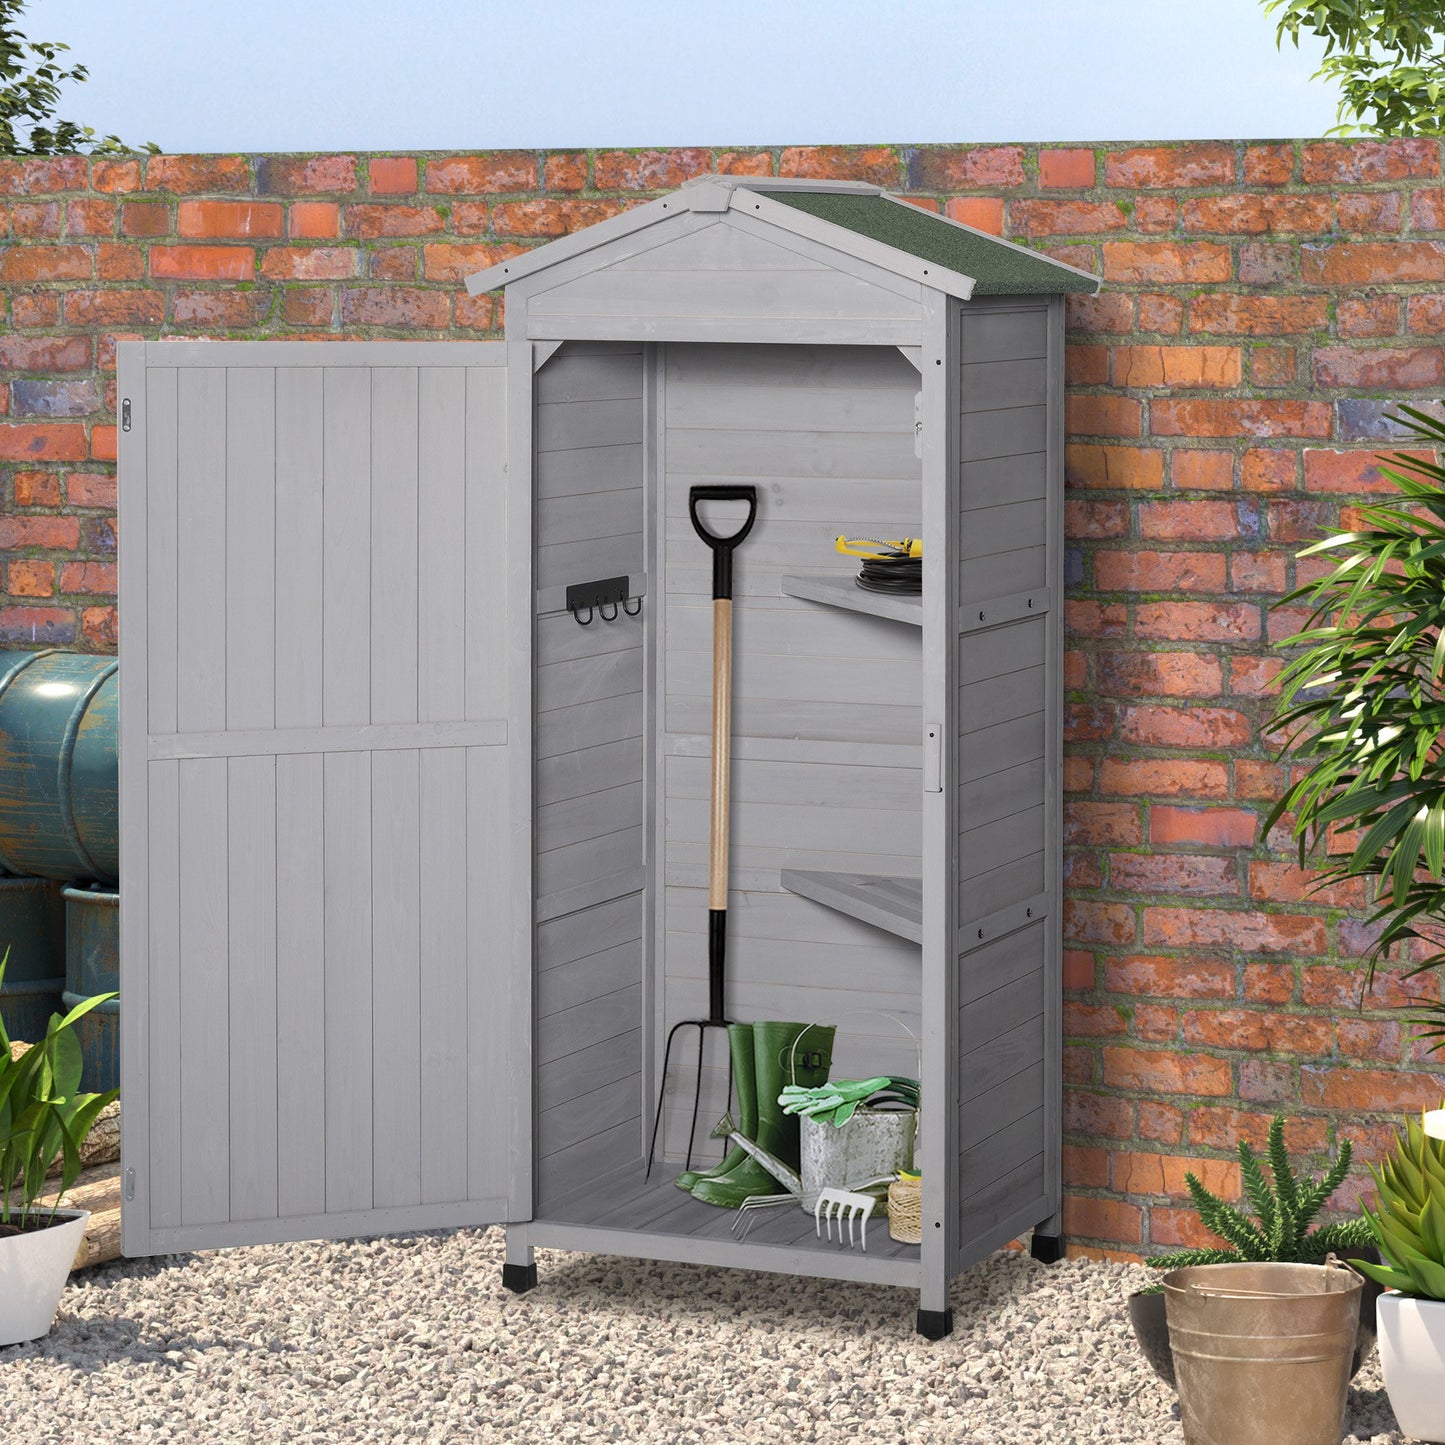 Outsunny Wooden Garden Cabinet 3-Tier Storage Shed 2 Shelves Lockable Organizer with Hooks Foot Pad 74 x 55 x 155cm Light Grey Hook